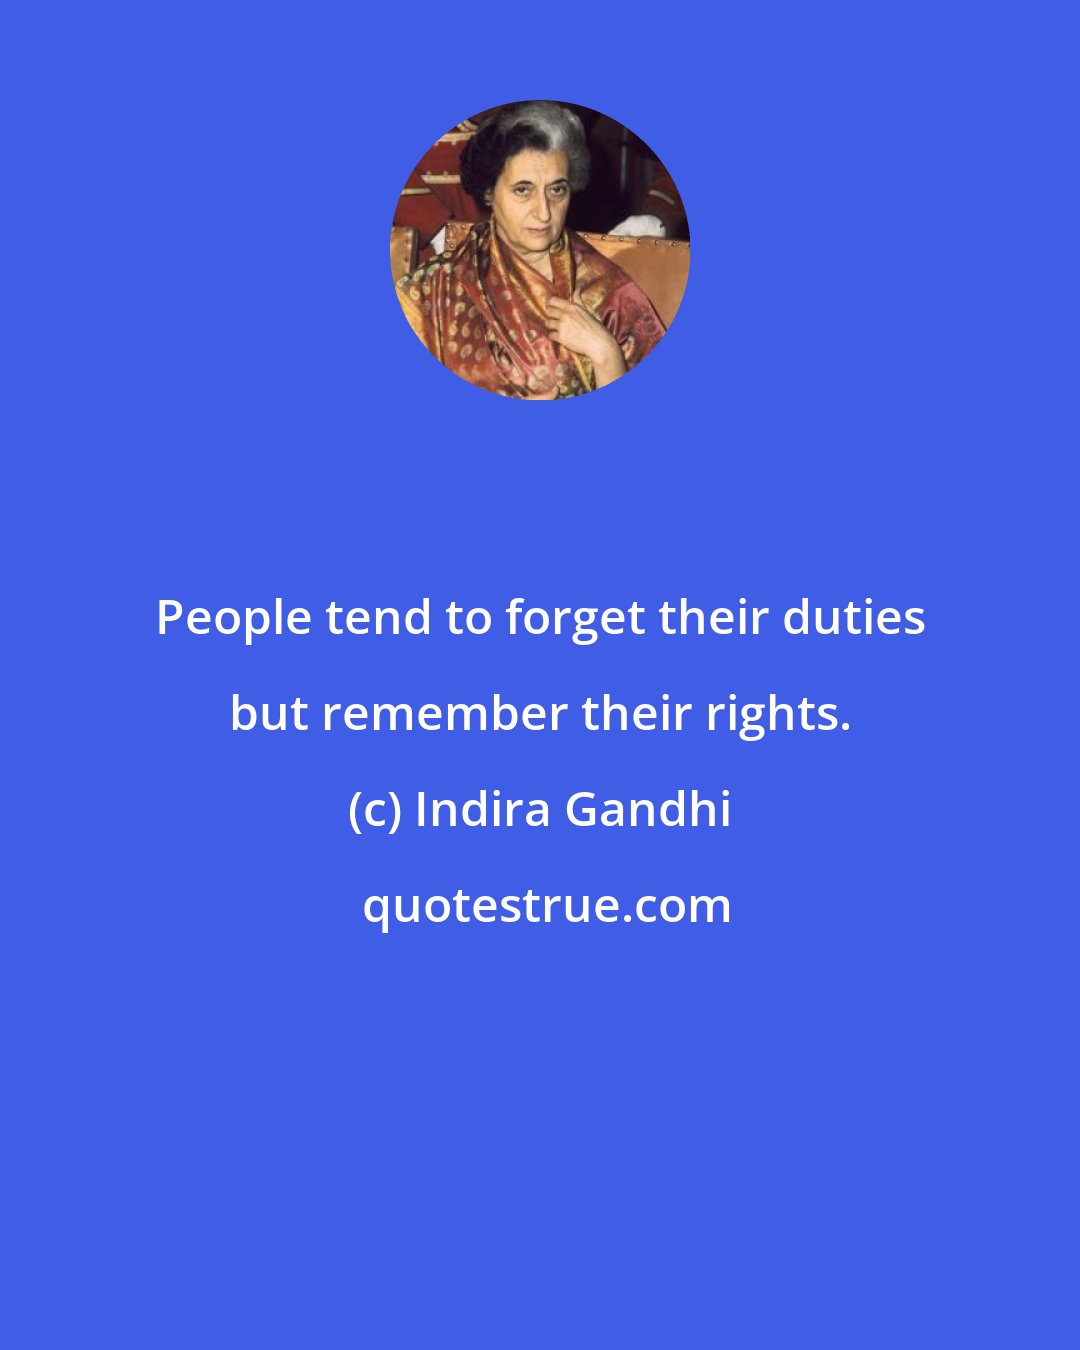 Indira Gandhi: People tend to forget their duties but remember their rights.